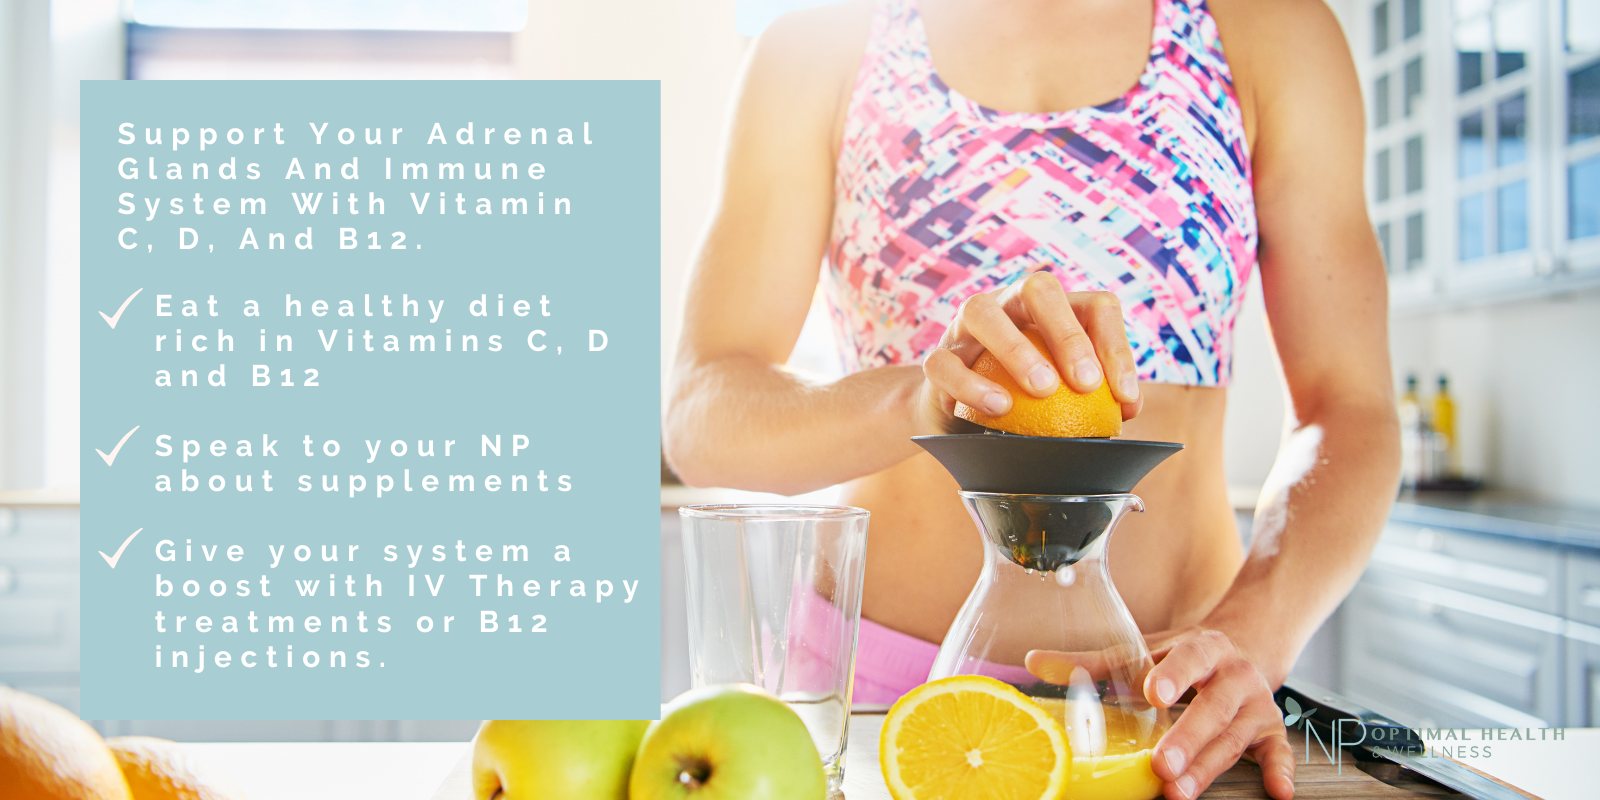 Support your adrenal glands and immune system with Vitamin C, D, B12